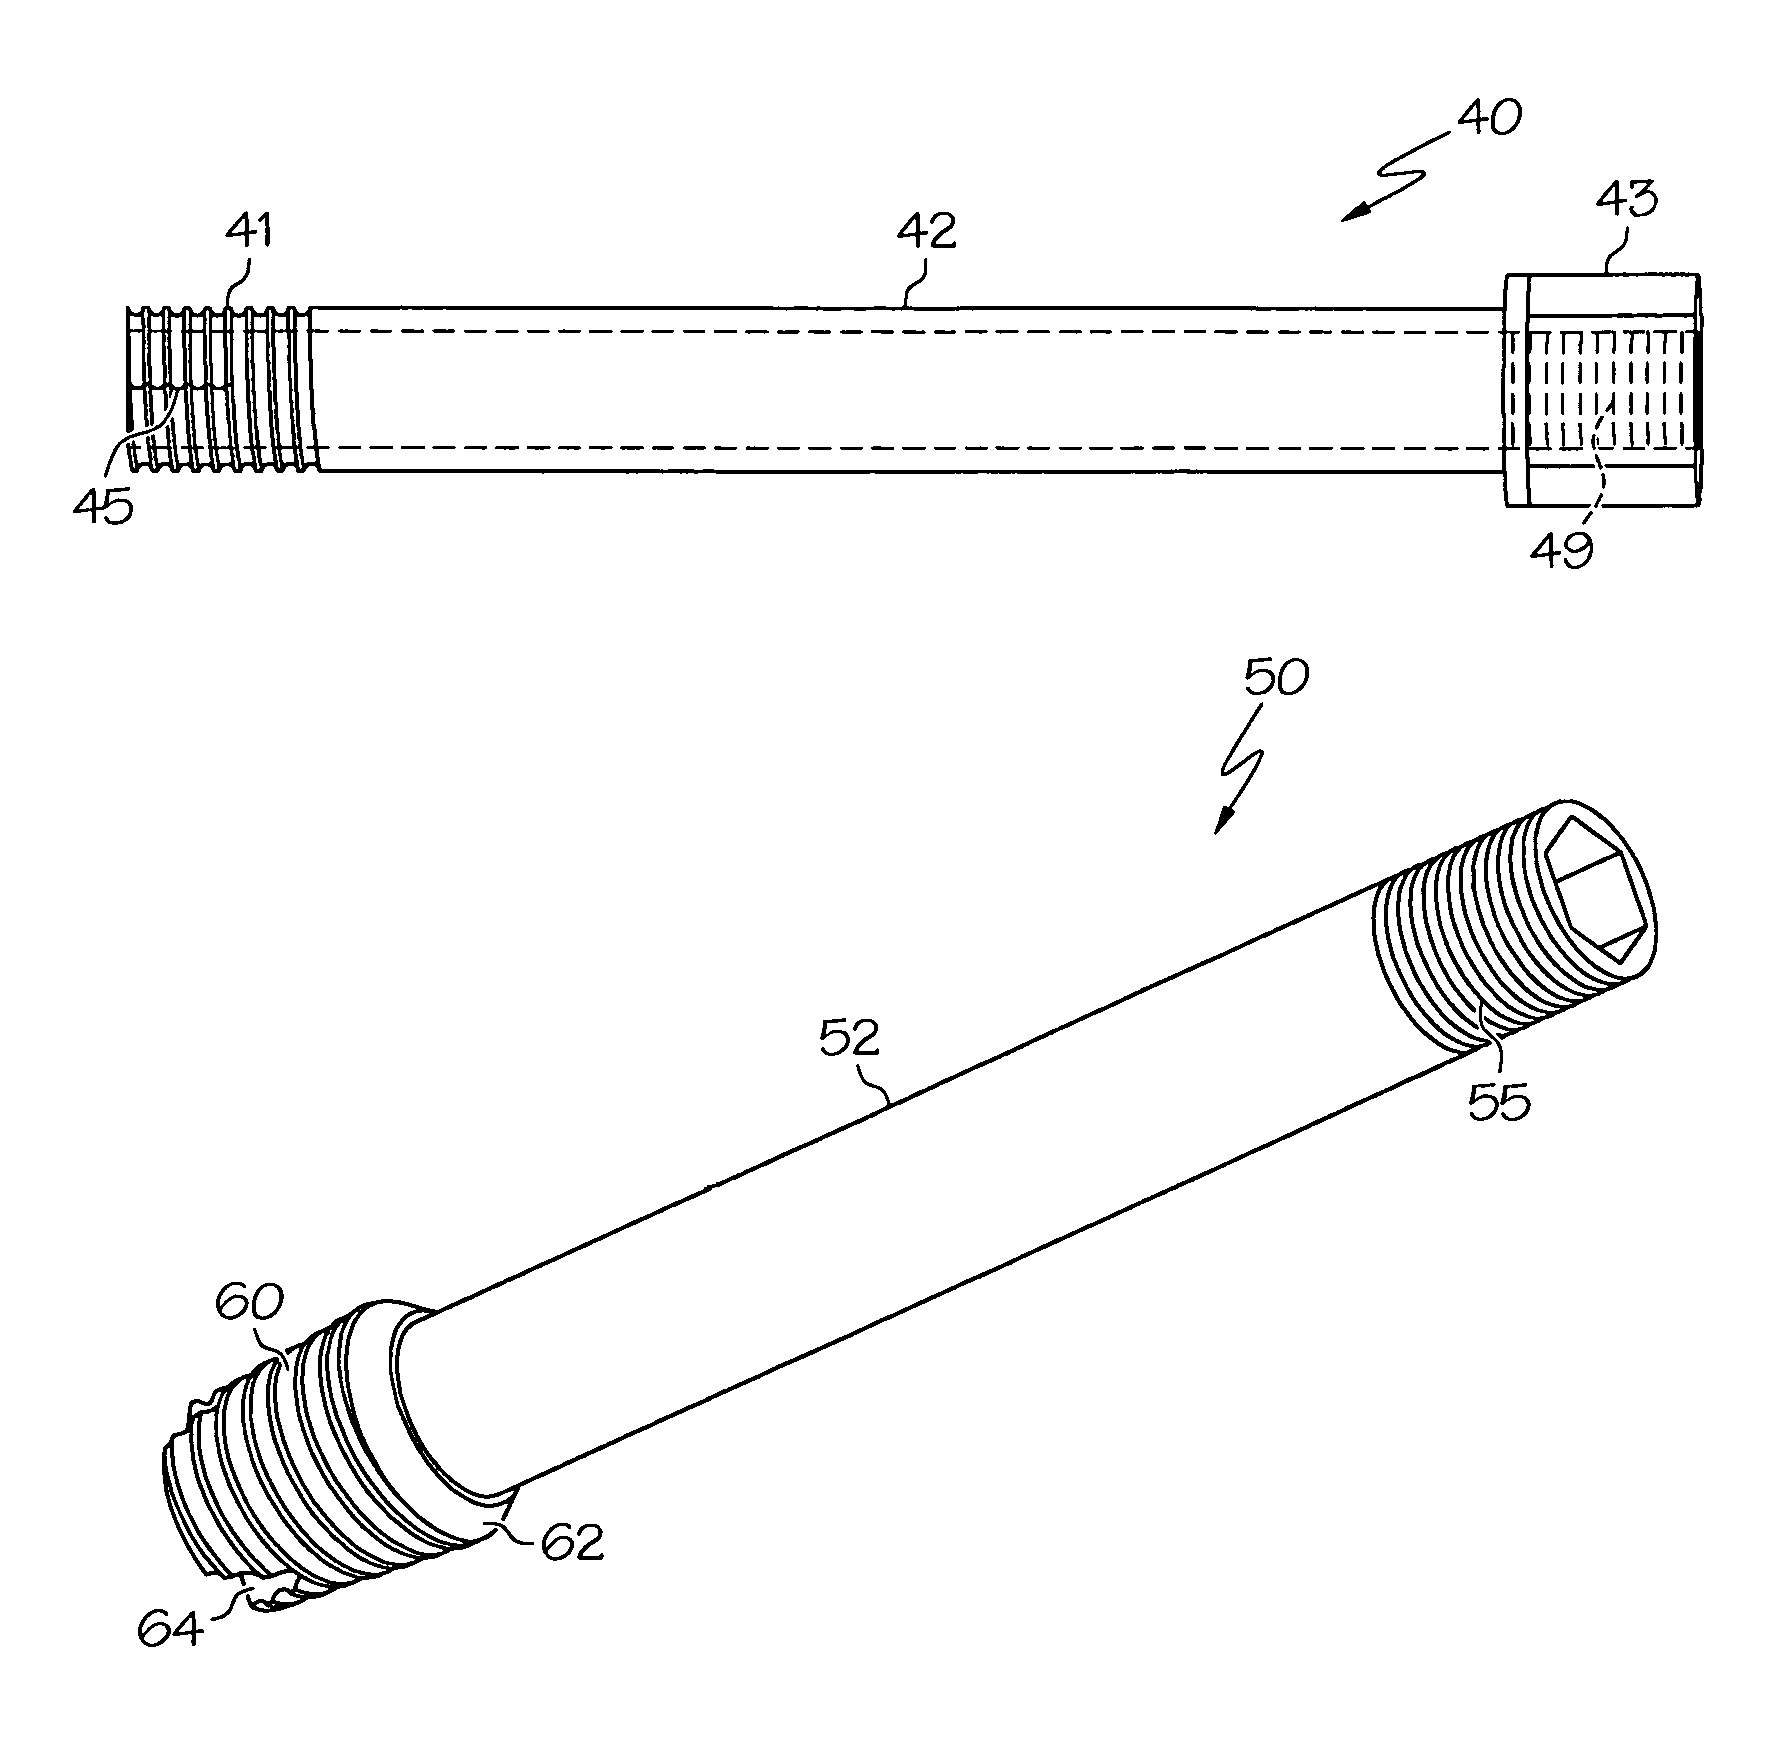 Spinal facet fixation device